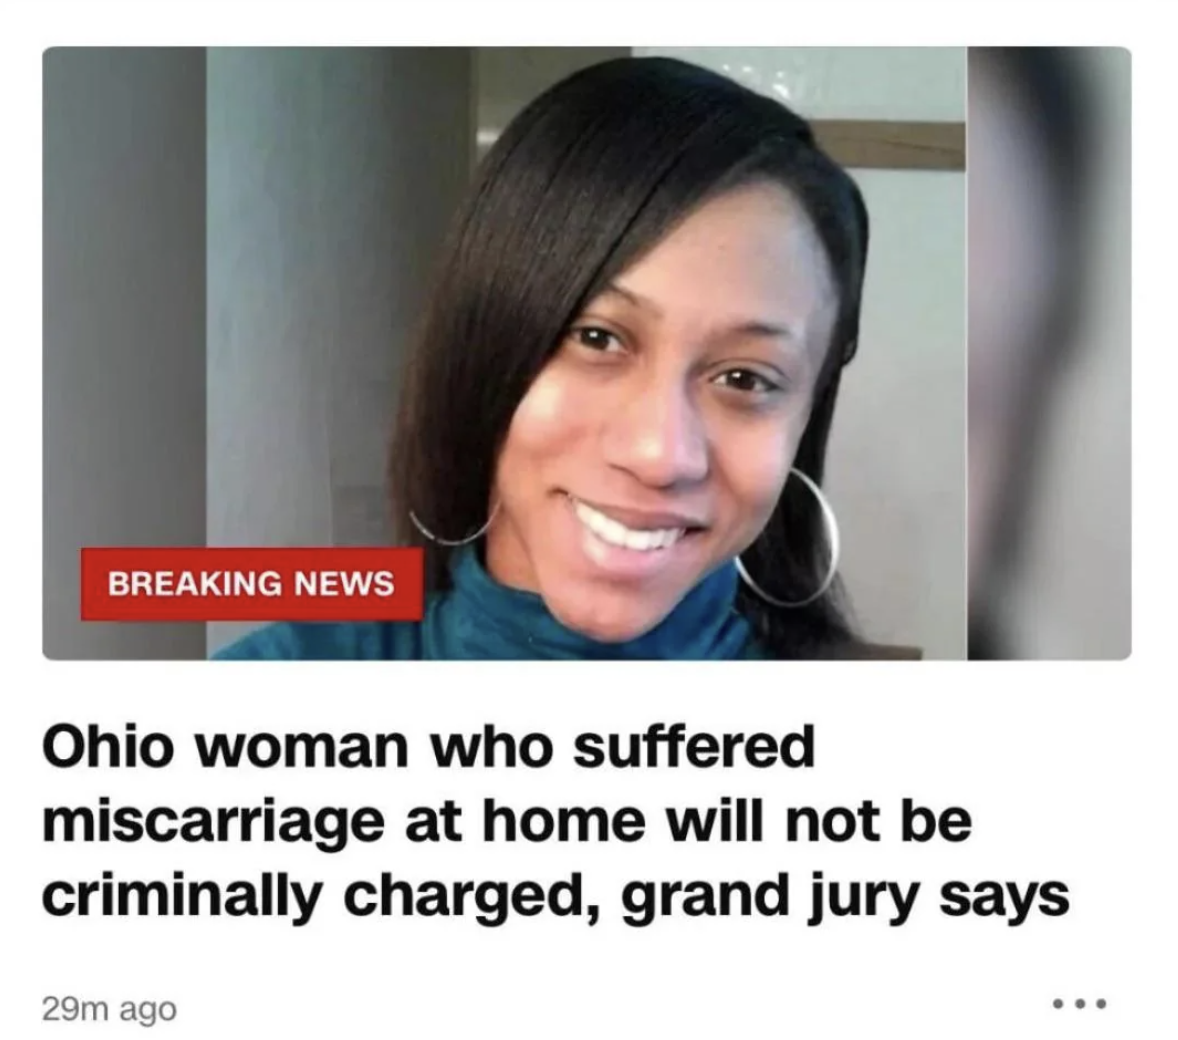 woman who had a miscarriage is now charged with abusing a corpse as stricter abortion laws play out nationwide - Breaking News Ohio woman who suffered miscarriage at home will not be criminally charged, grand jury says 29m ago